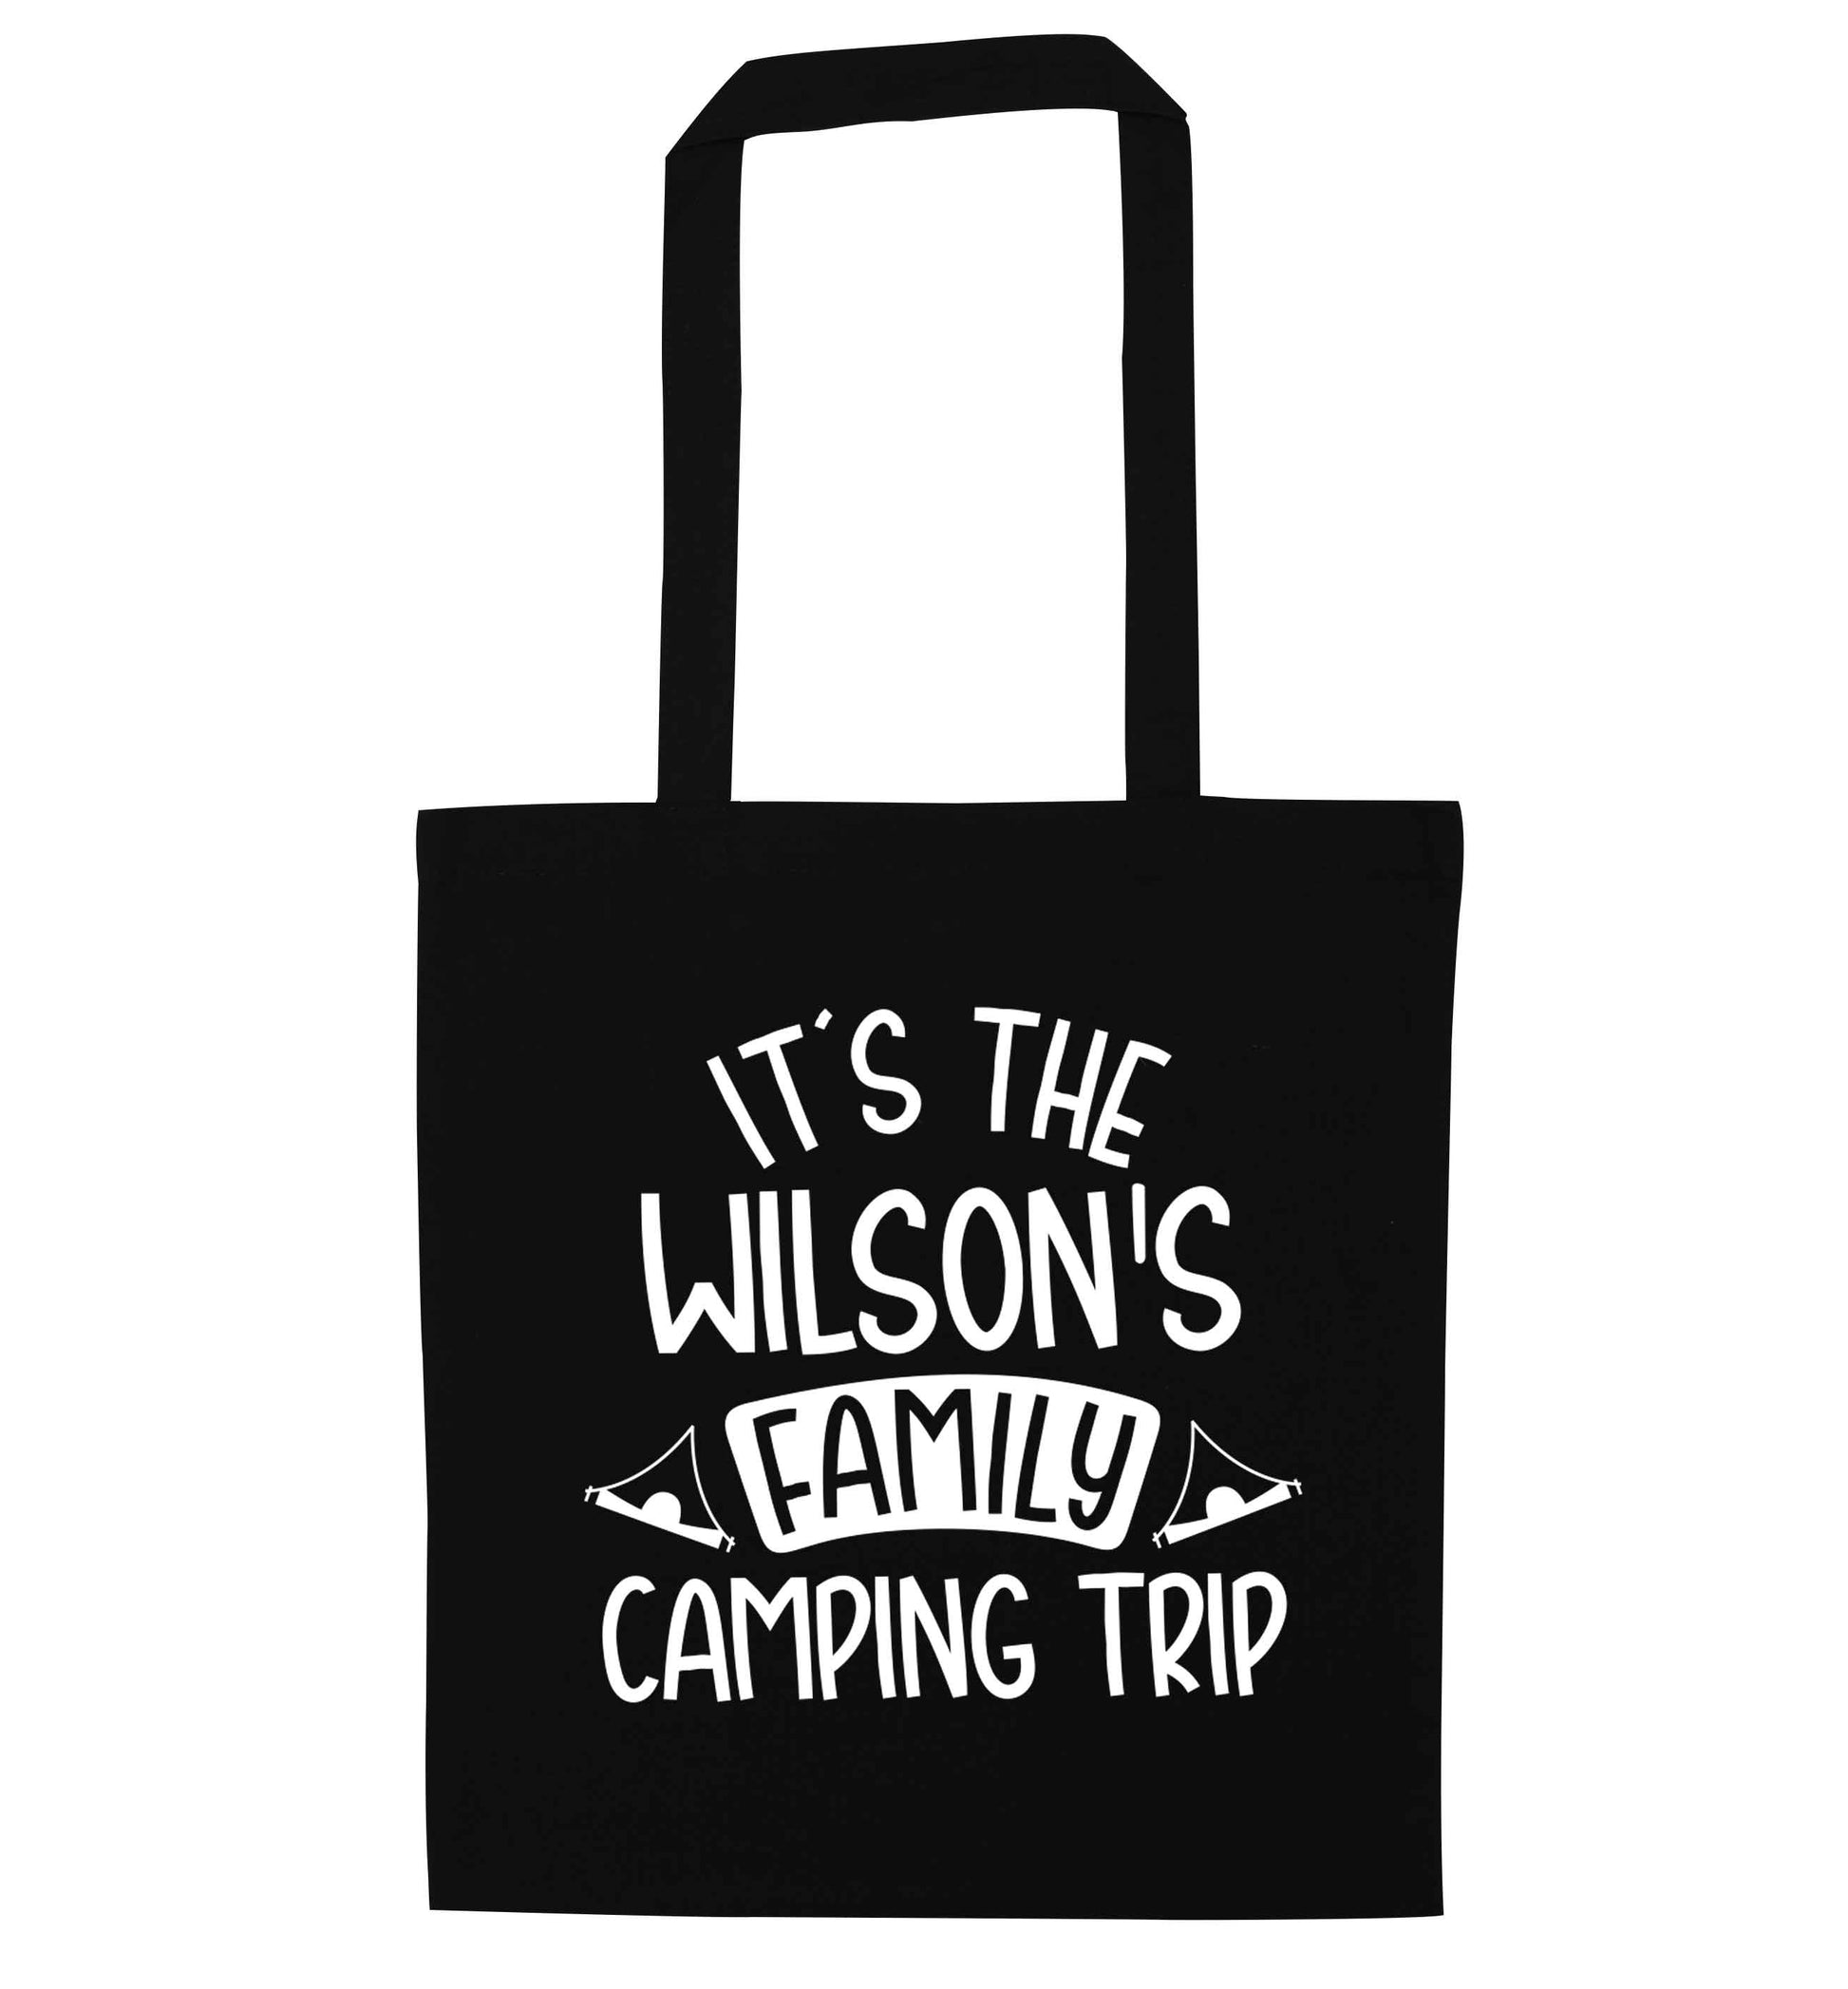 It's the Wilson's family camping trip personalised black tote bag